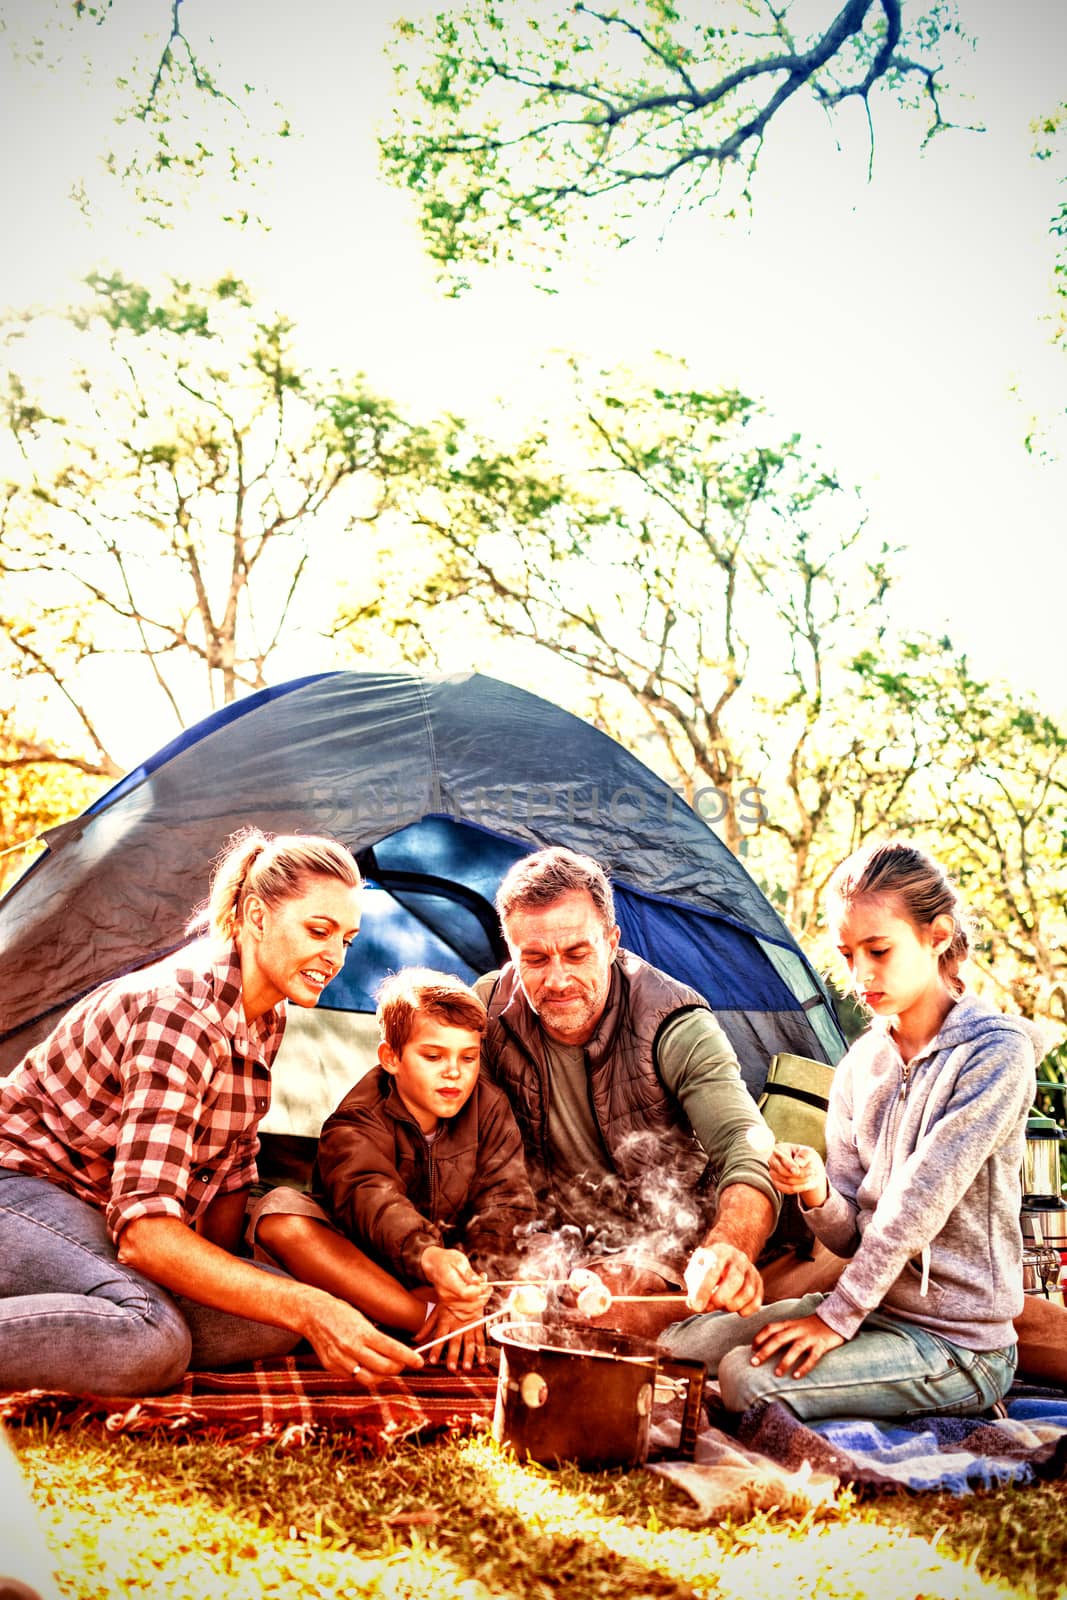 Family roasting marshmallows outside the tent on a sunny day